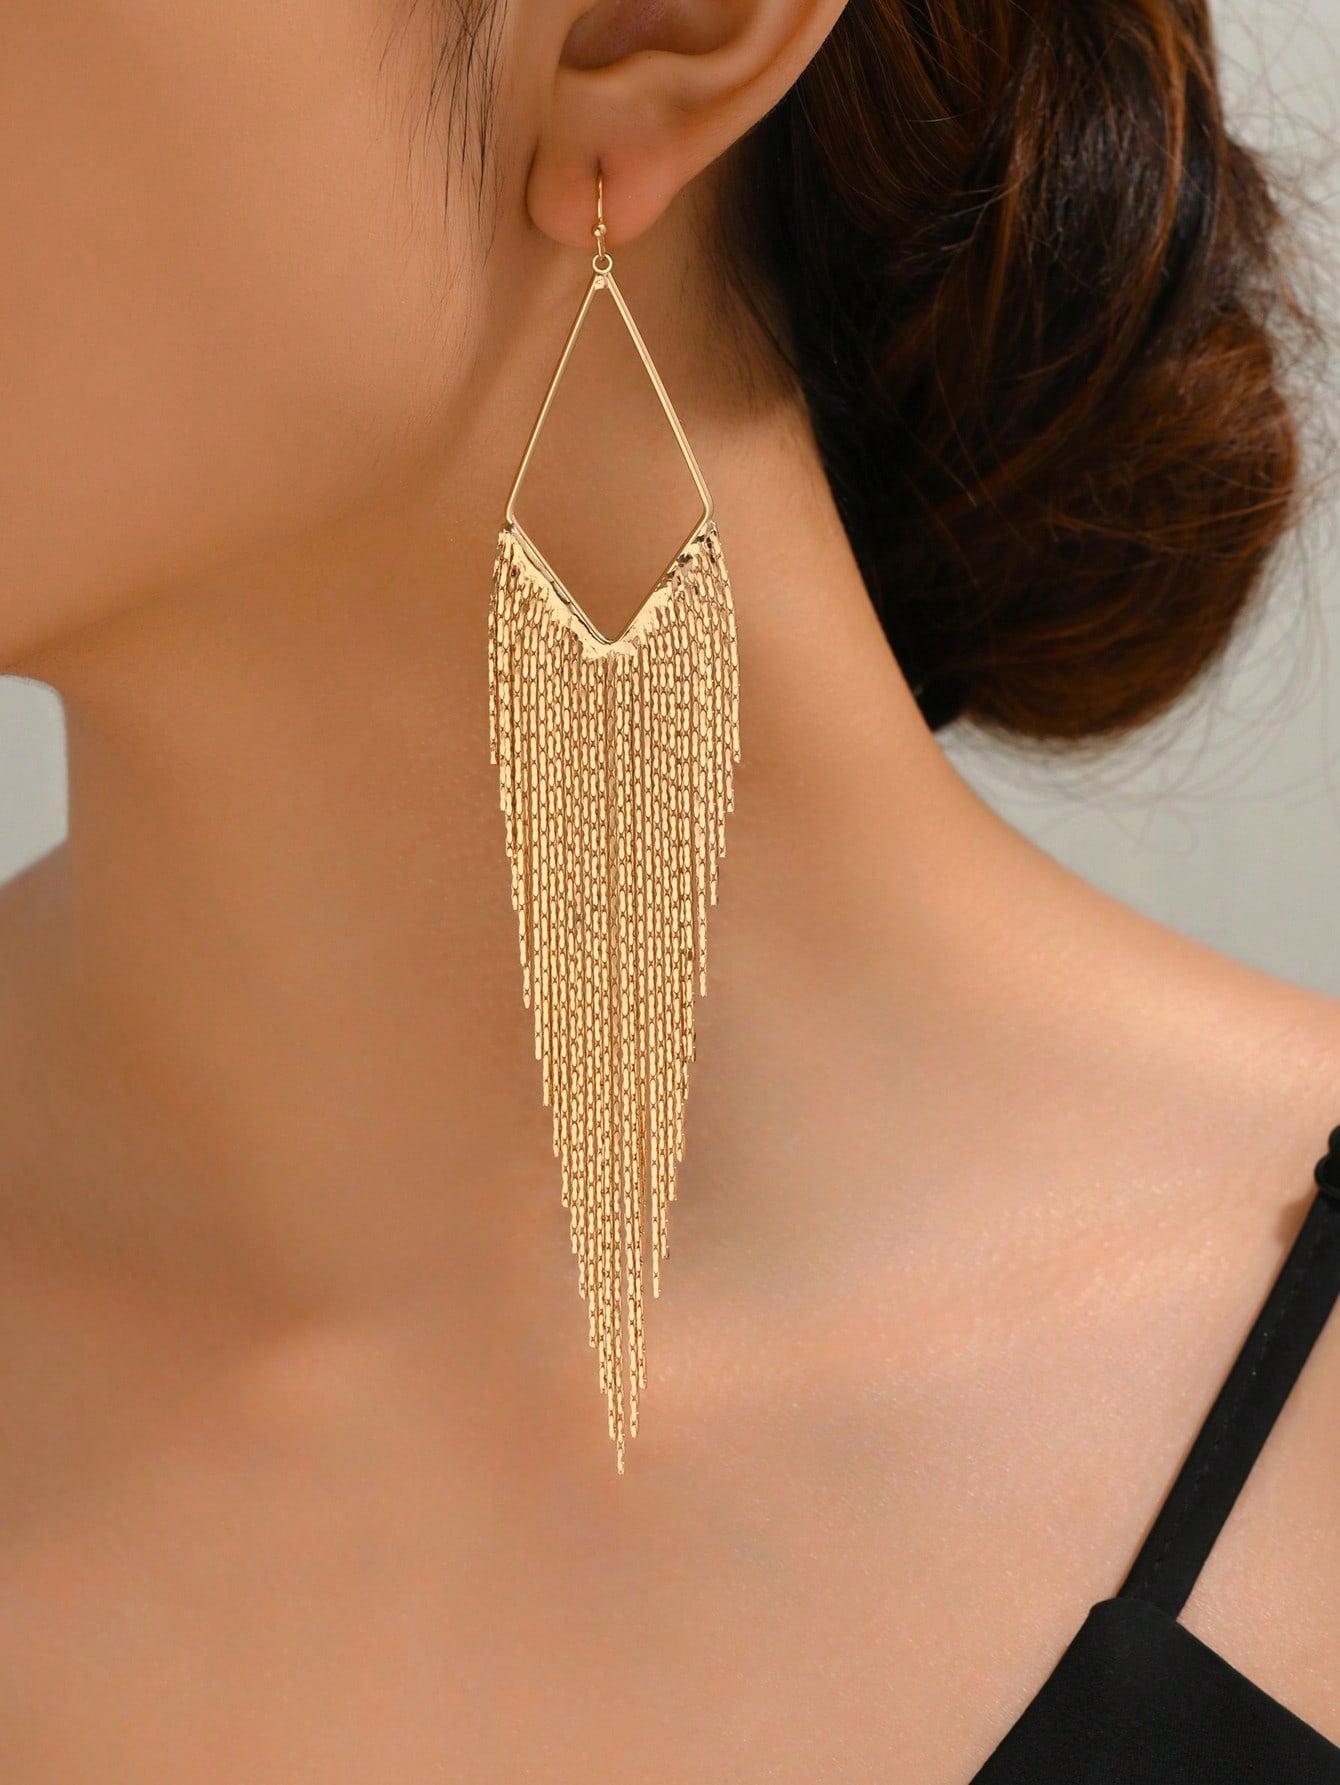 2pcs Fashion Metal Tassel Drop Earrings For Women For Daily Decoration Copper Jewelry